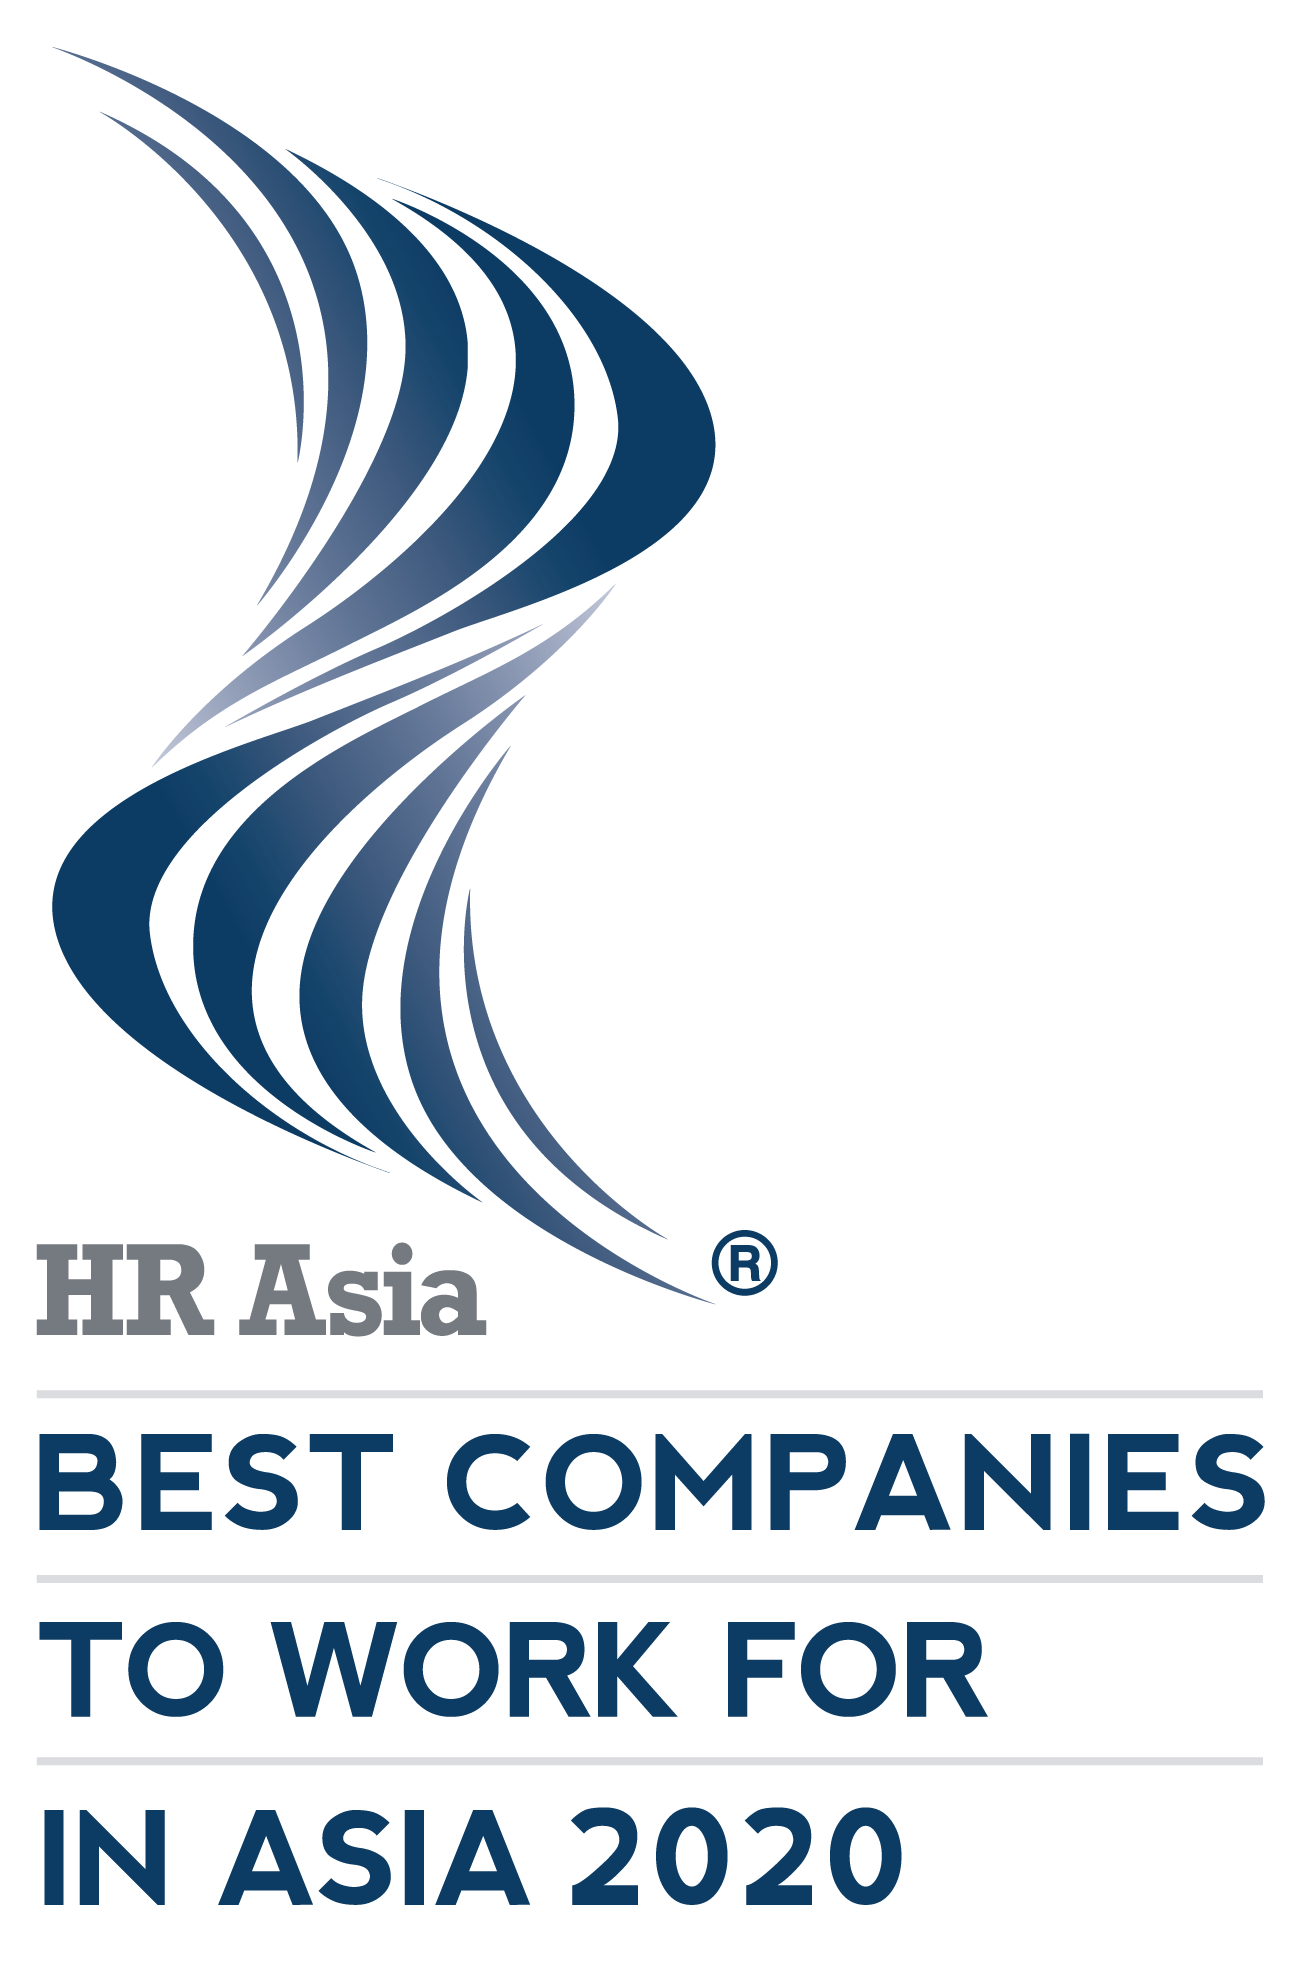 HR Asia Best Companies to Work for in Asia Award 2020 Singapore <br> WeCare - HR Asia Most Caring Companies Award 2020